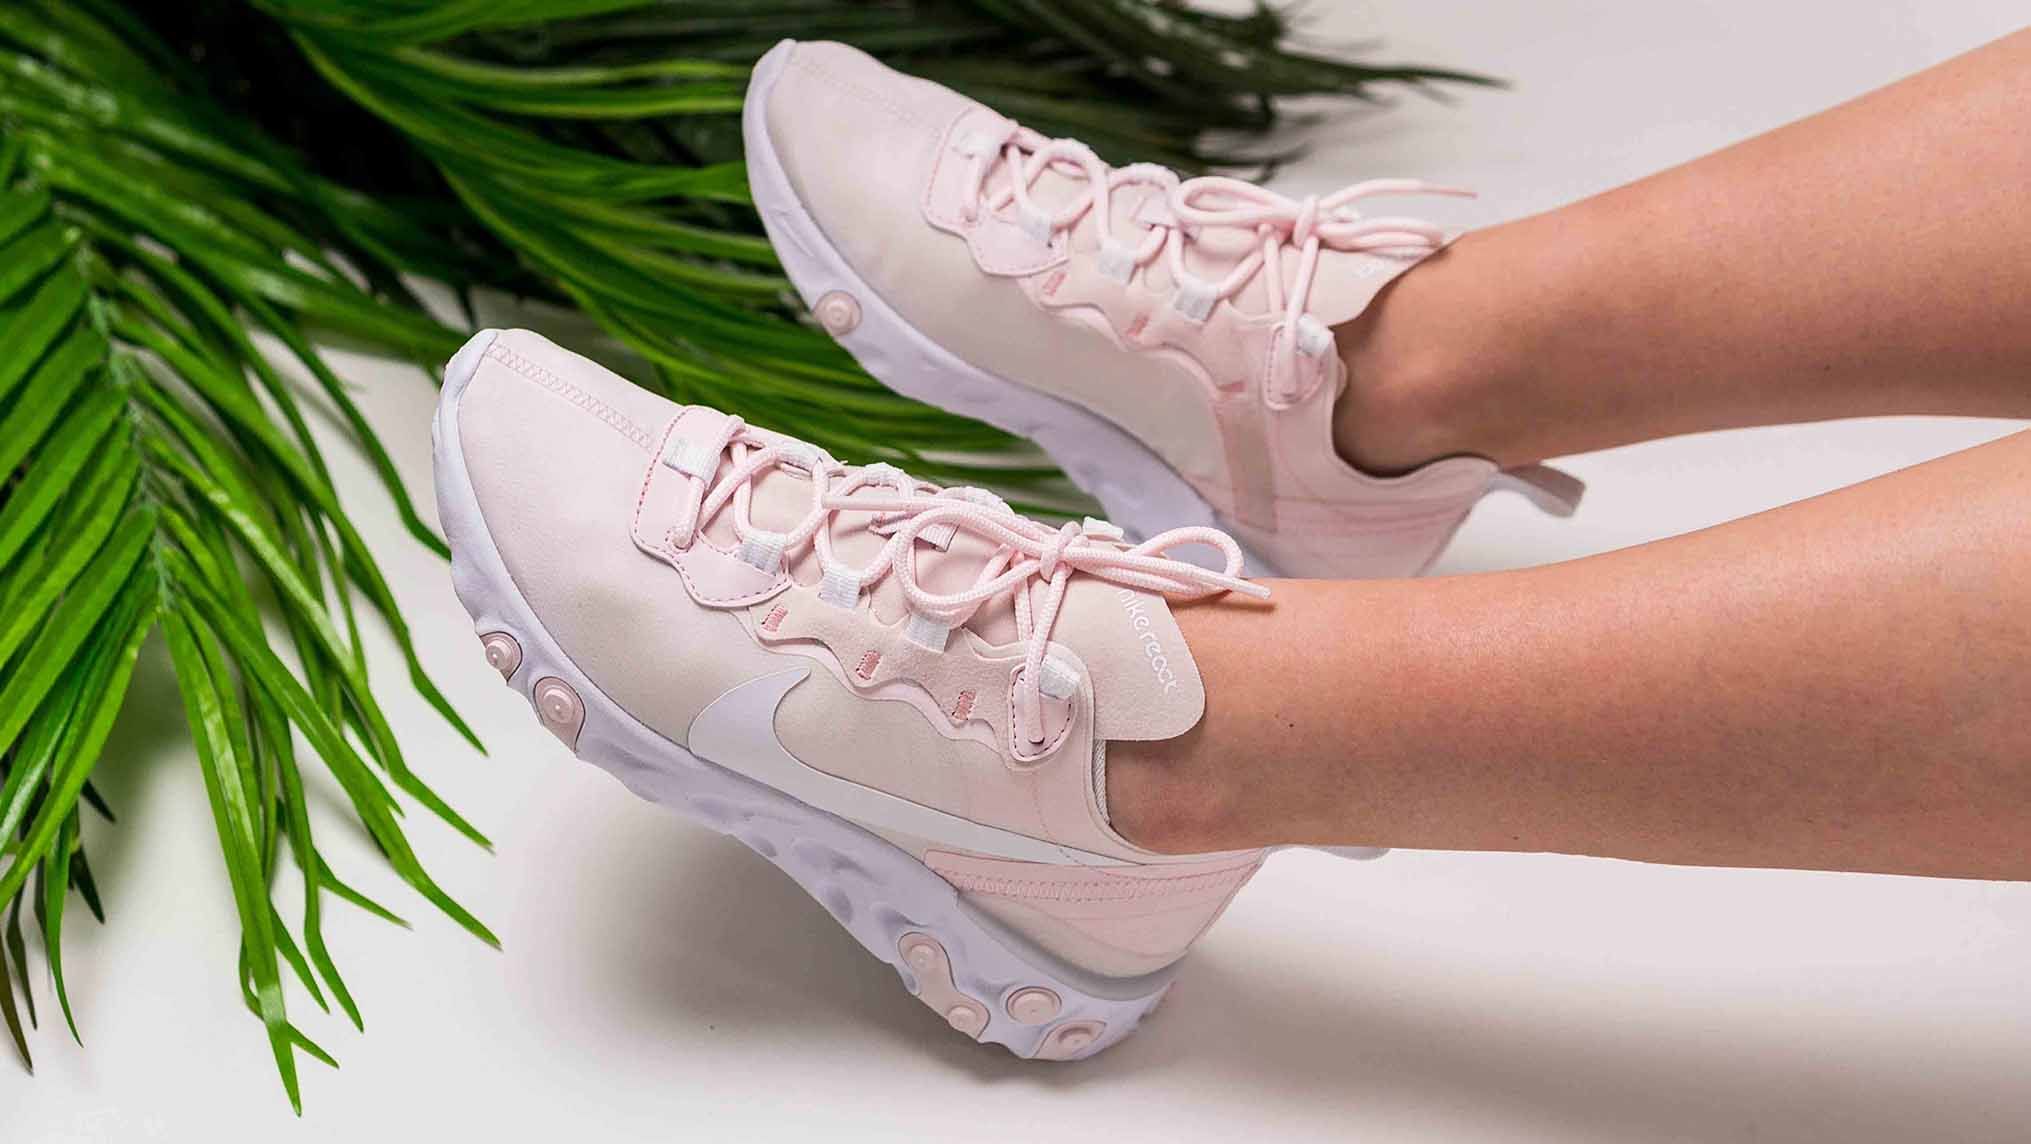 The Sole Womens on Twitter: "An Closer Look The Nike React Element 55 'Light Pink' See more: https://t.co/hGg8UxoMaL https://t.co/sXSaYYzcQn" / Twitter